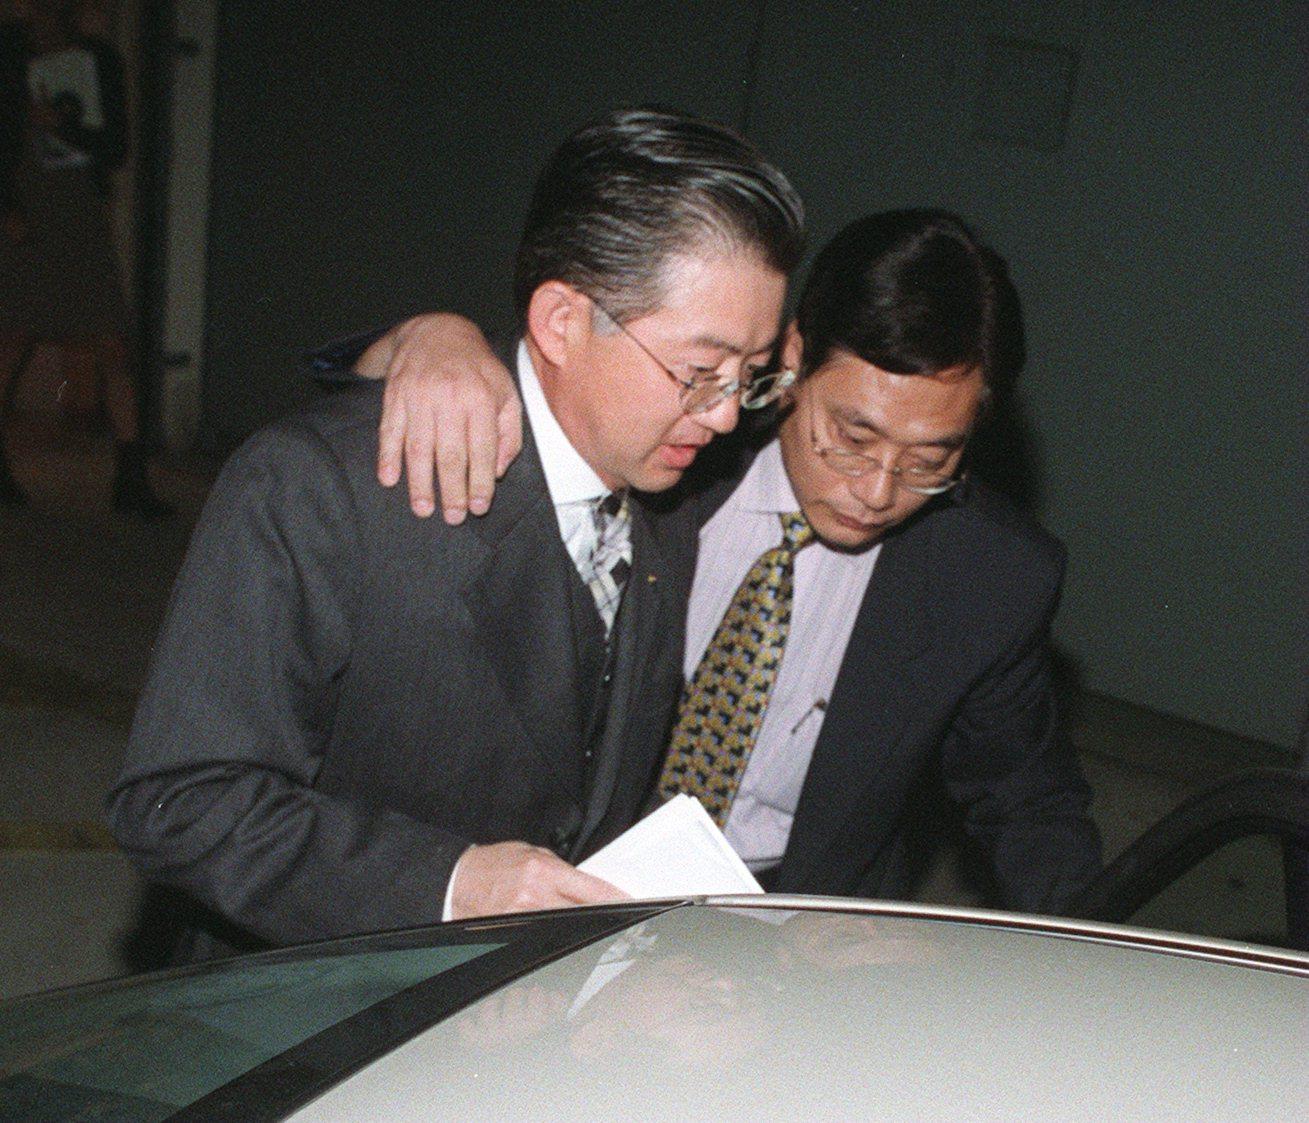 When a man offered to murder the ex-wife of Dr Walton Li’(left) in return for HK$800,000, the hospital chief called the police. Iu Shui-tai, who made the hoax offer, was sentenced to 2½ years for the attempt to swindle him. Photo: SCMP